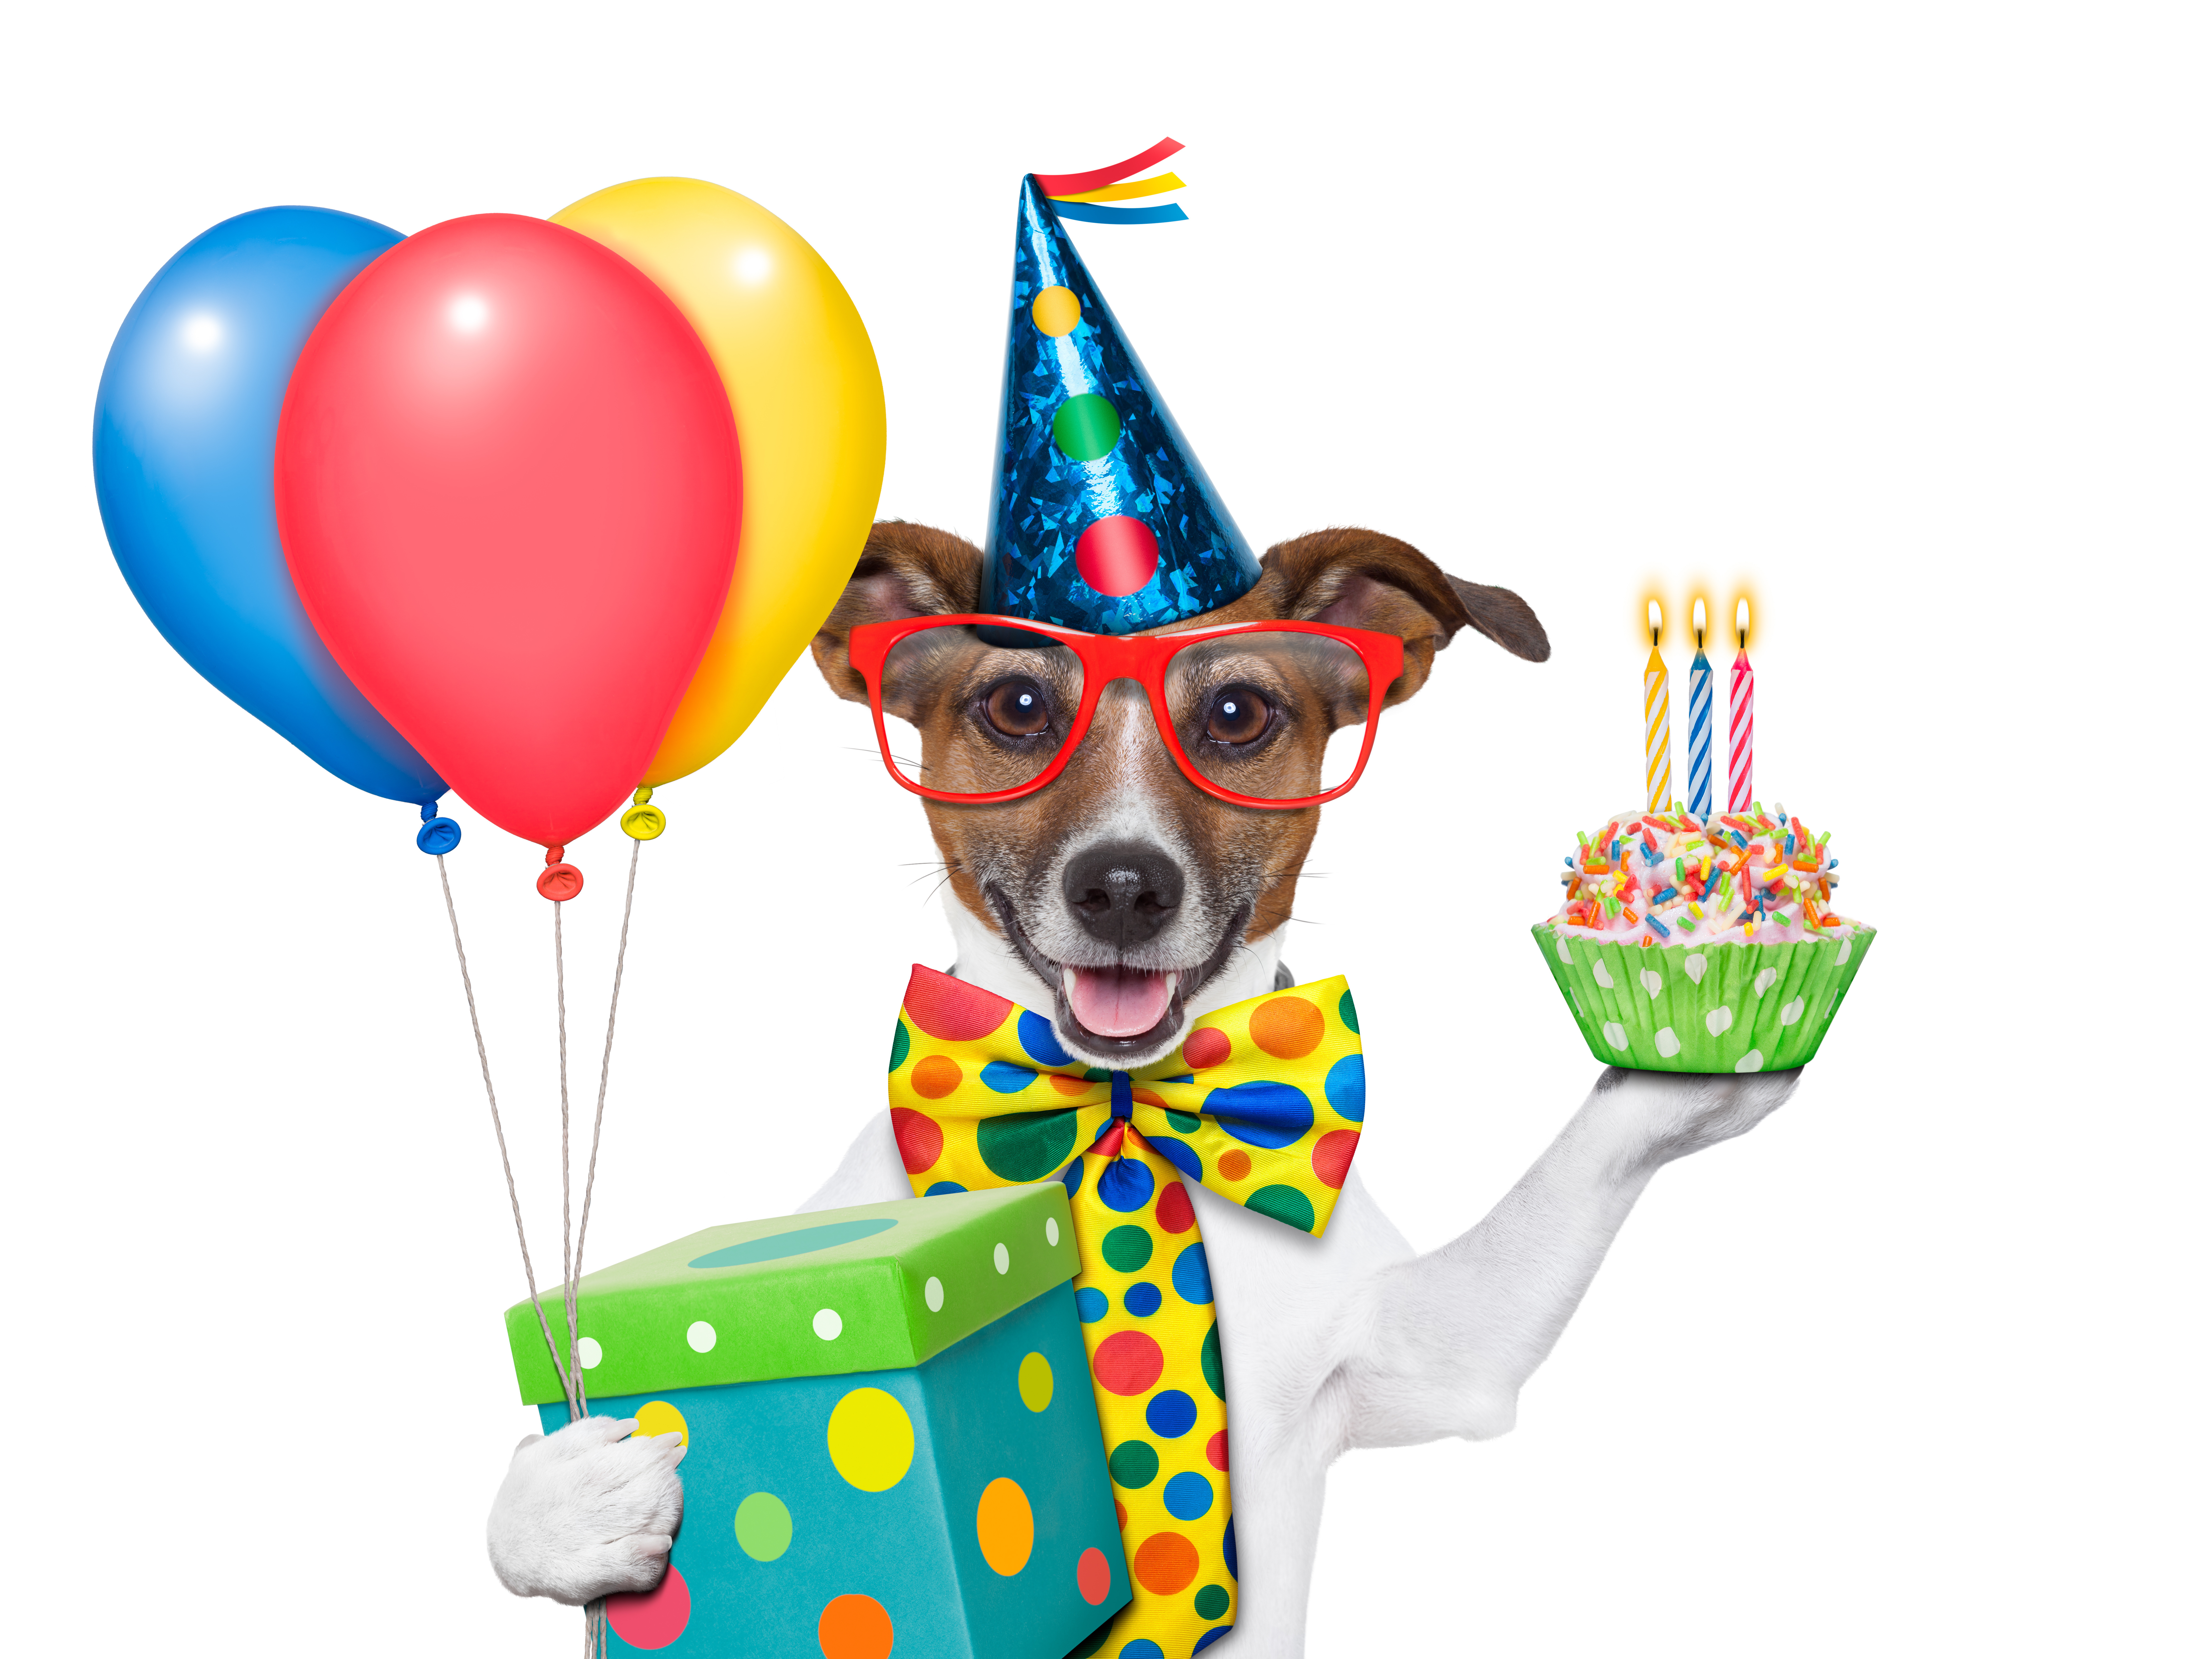 Dog's Birthday, Present and Balloons # 8395x6296. All For Desktop